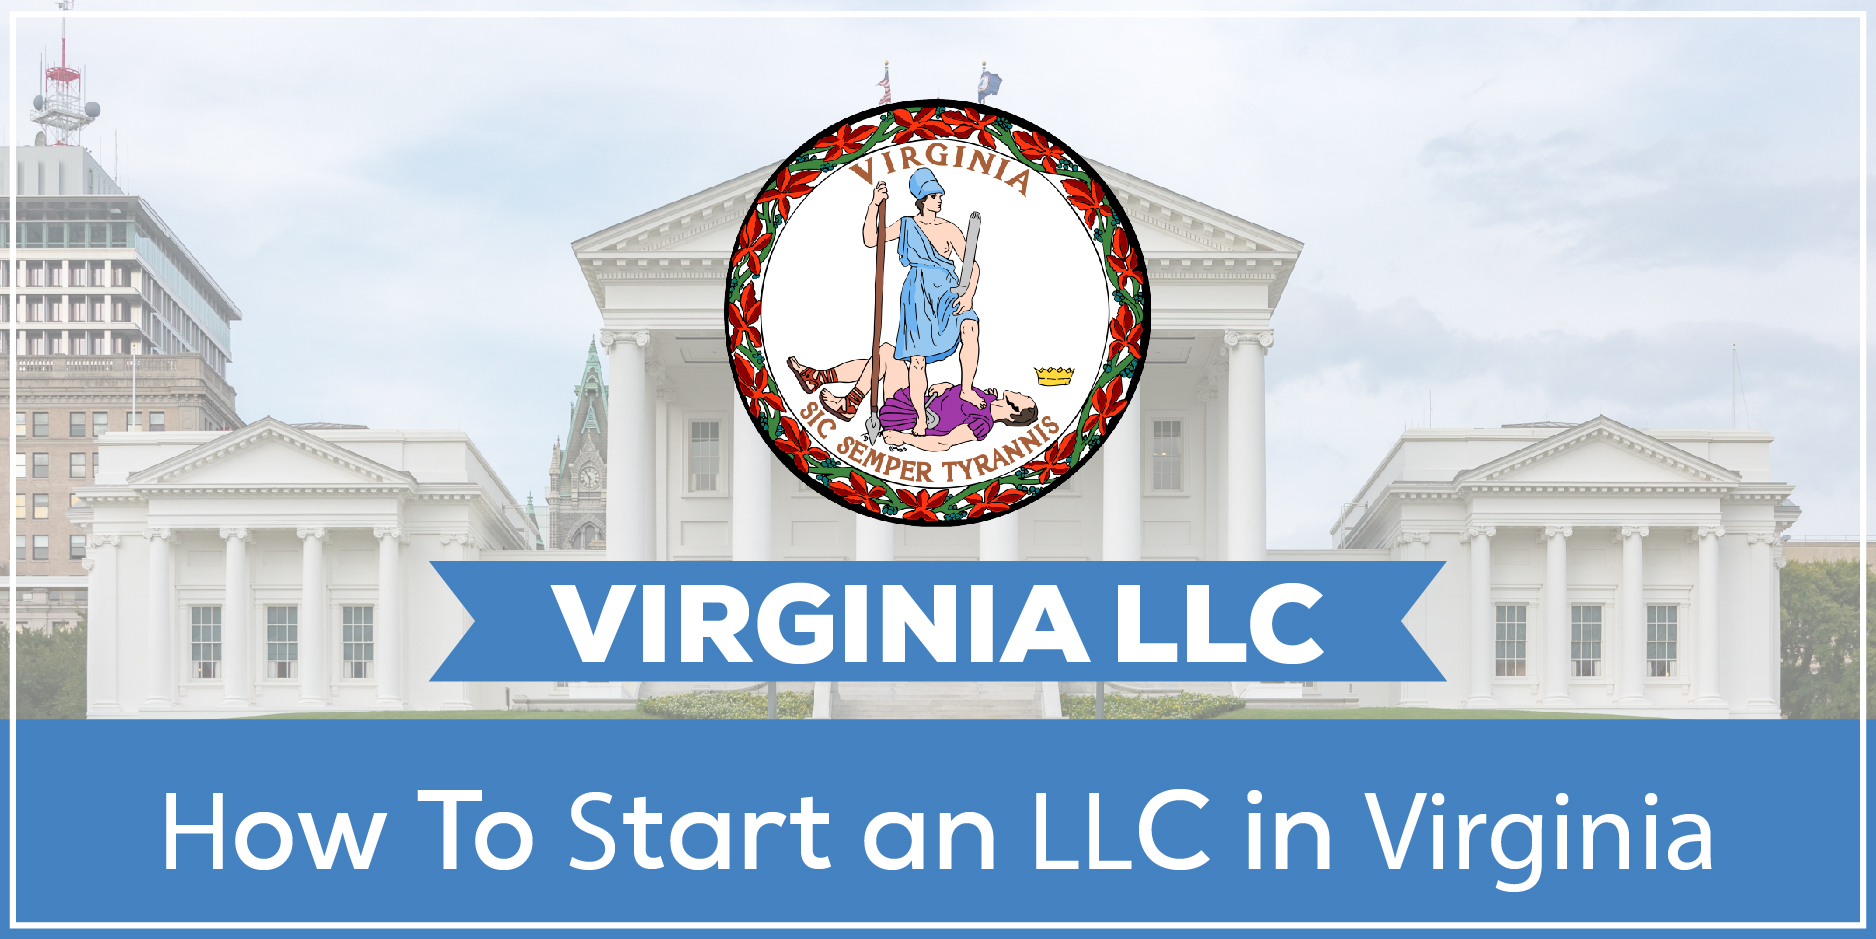 How to start an LLC in Virginia